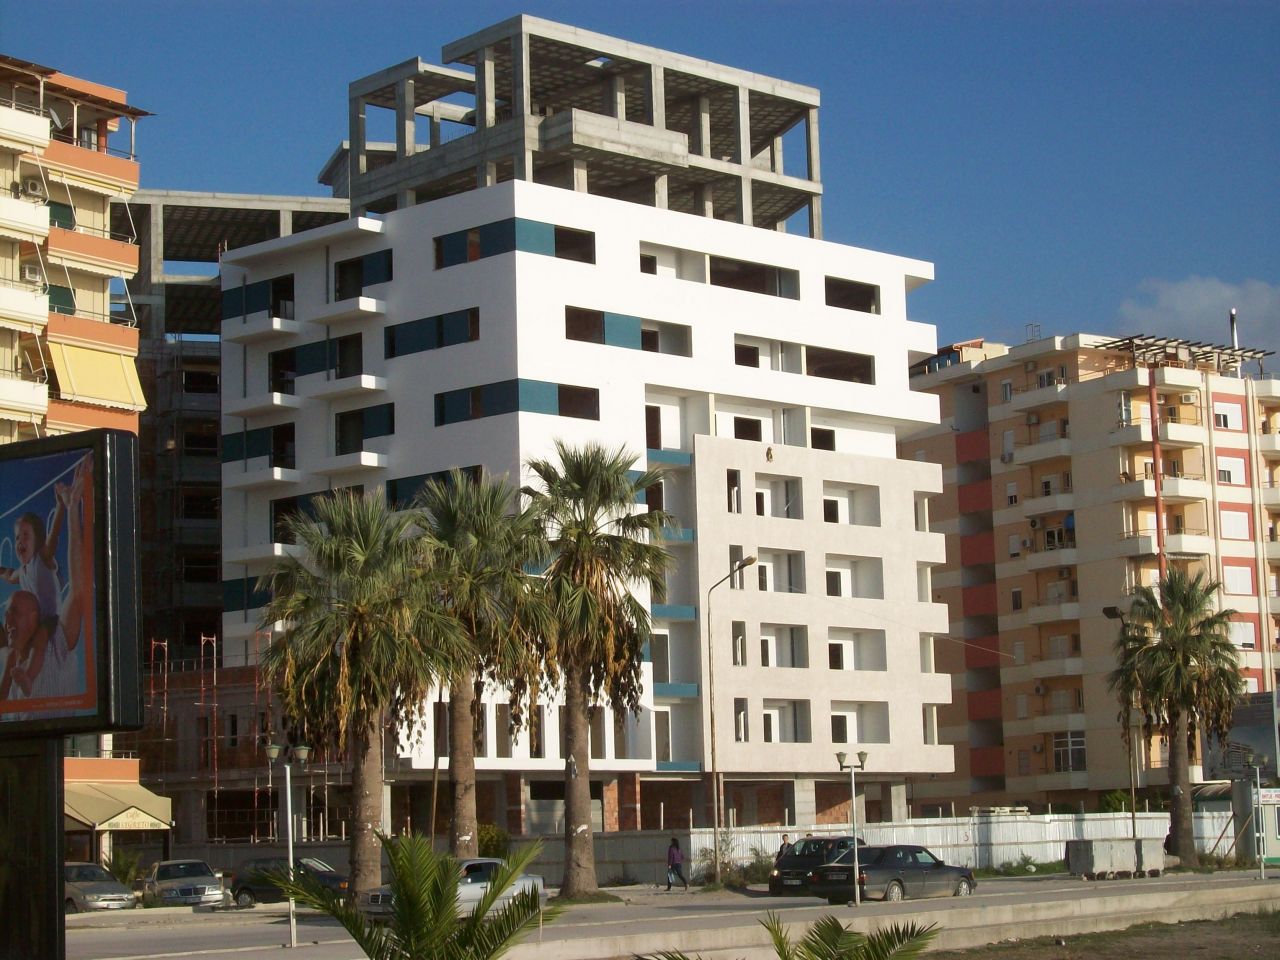 Apartments for sale in Vlora, close to the sea. Beautiful nature and great conditions. 